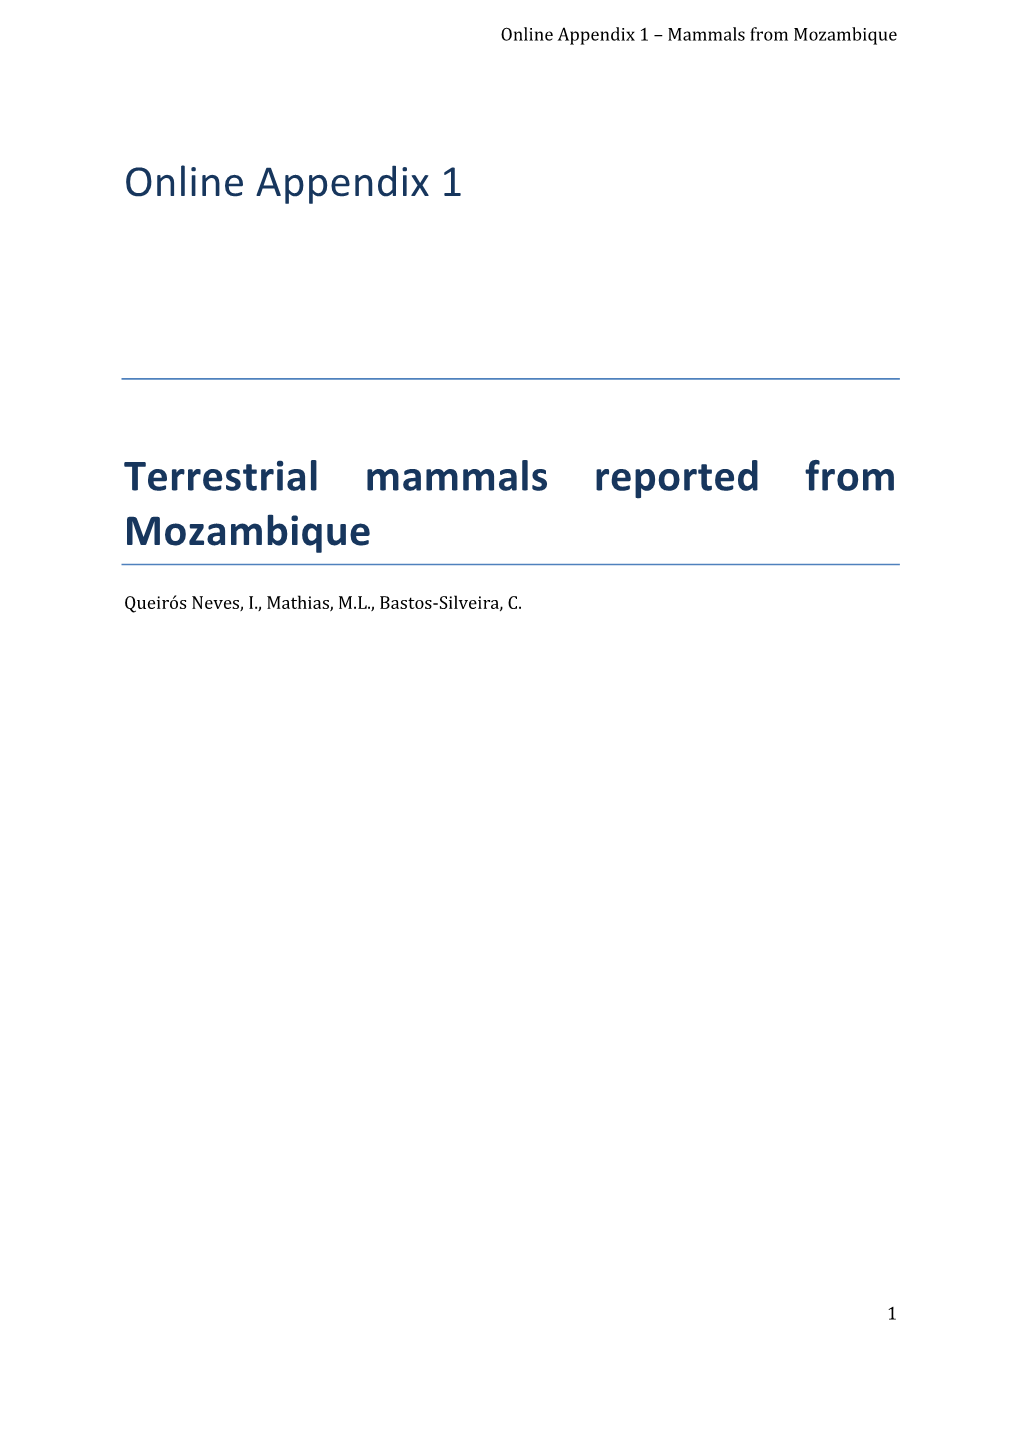 Online Appendix 1 Terrestrial Mammals Reported from Mozambique